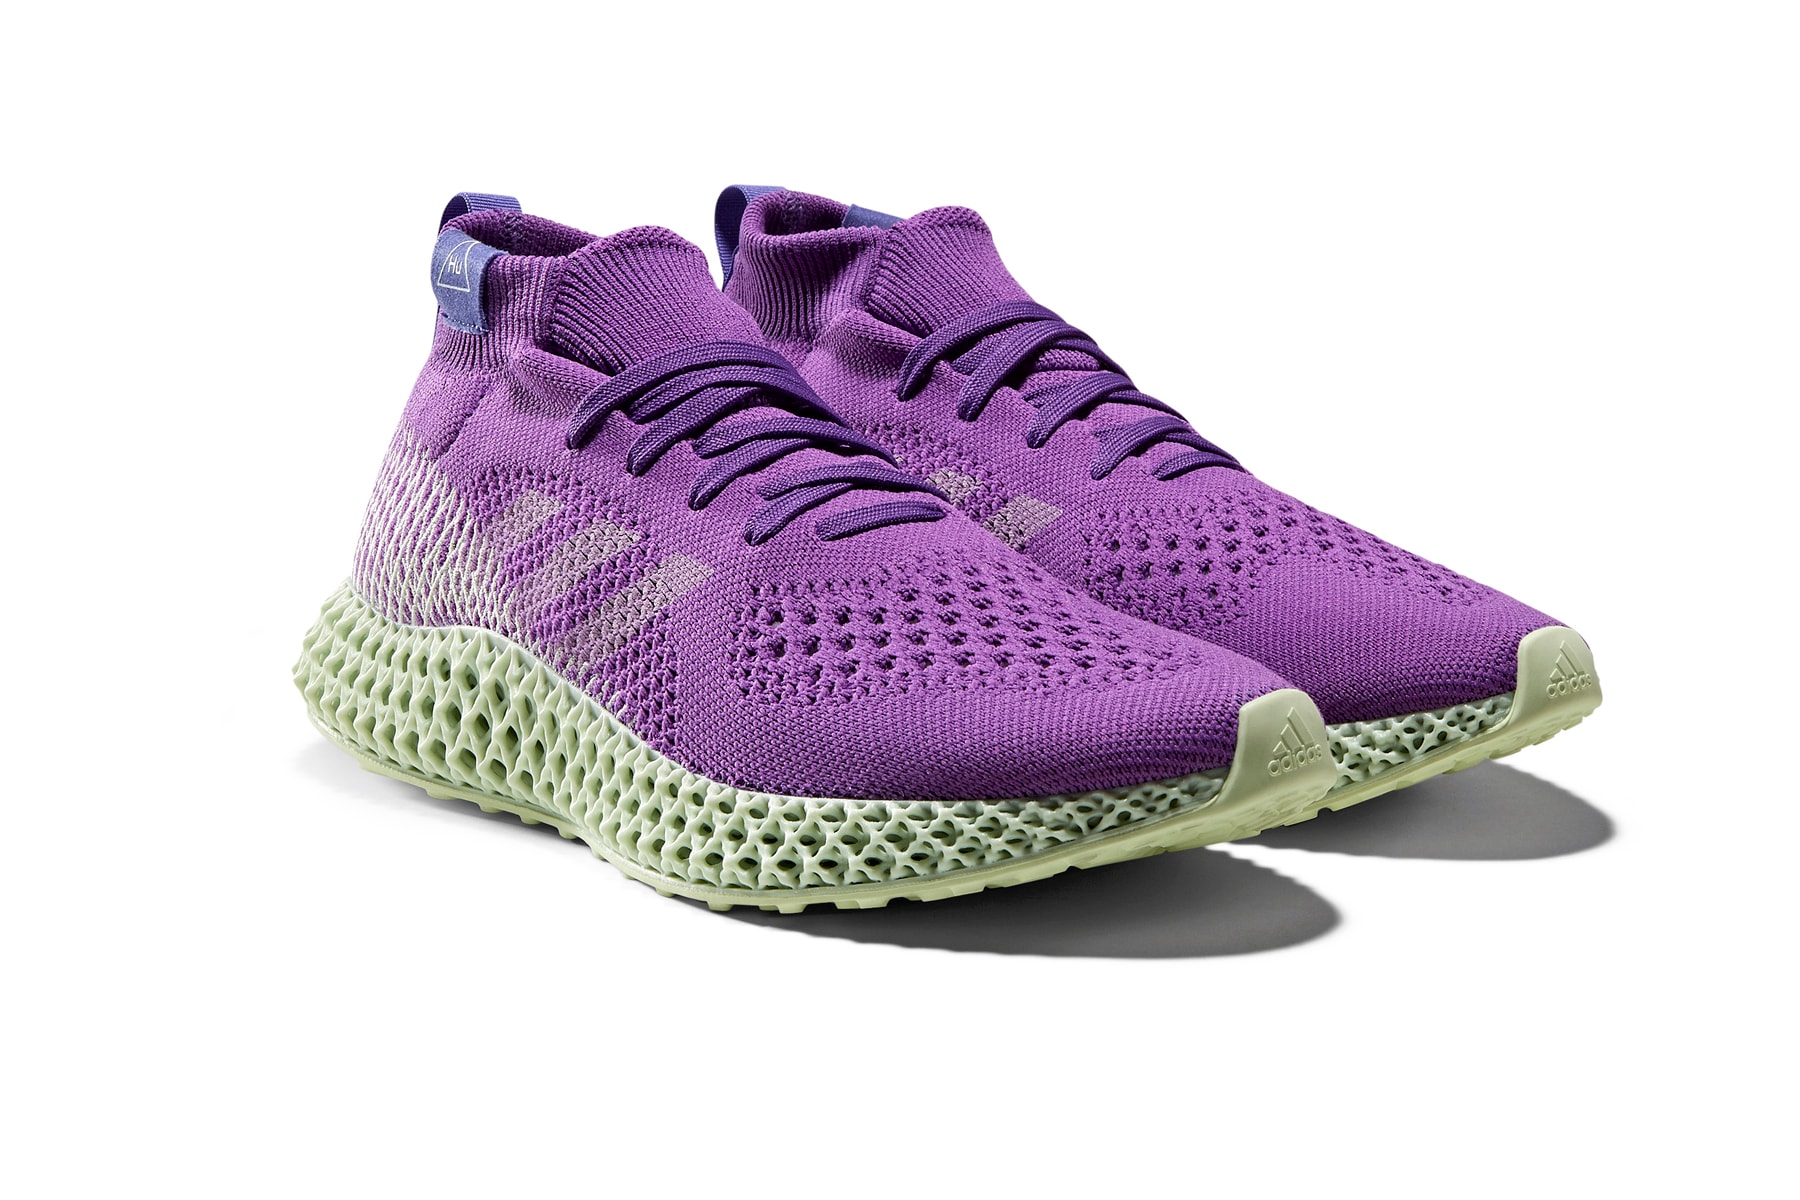 adidas Originals Pharrell Williams 4D Runner Release Info collaborations footwear sneakers 3d printing active purple tech olive 